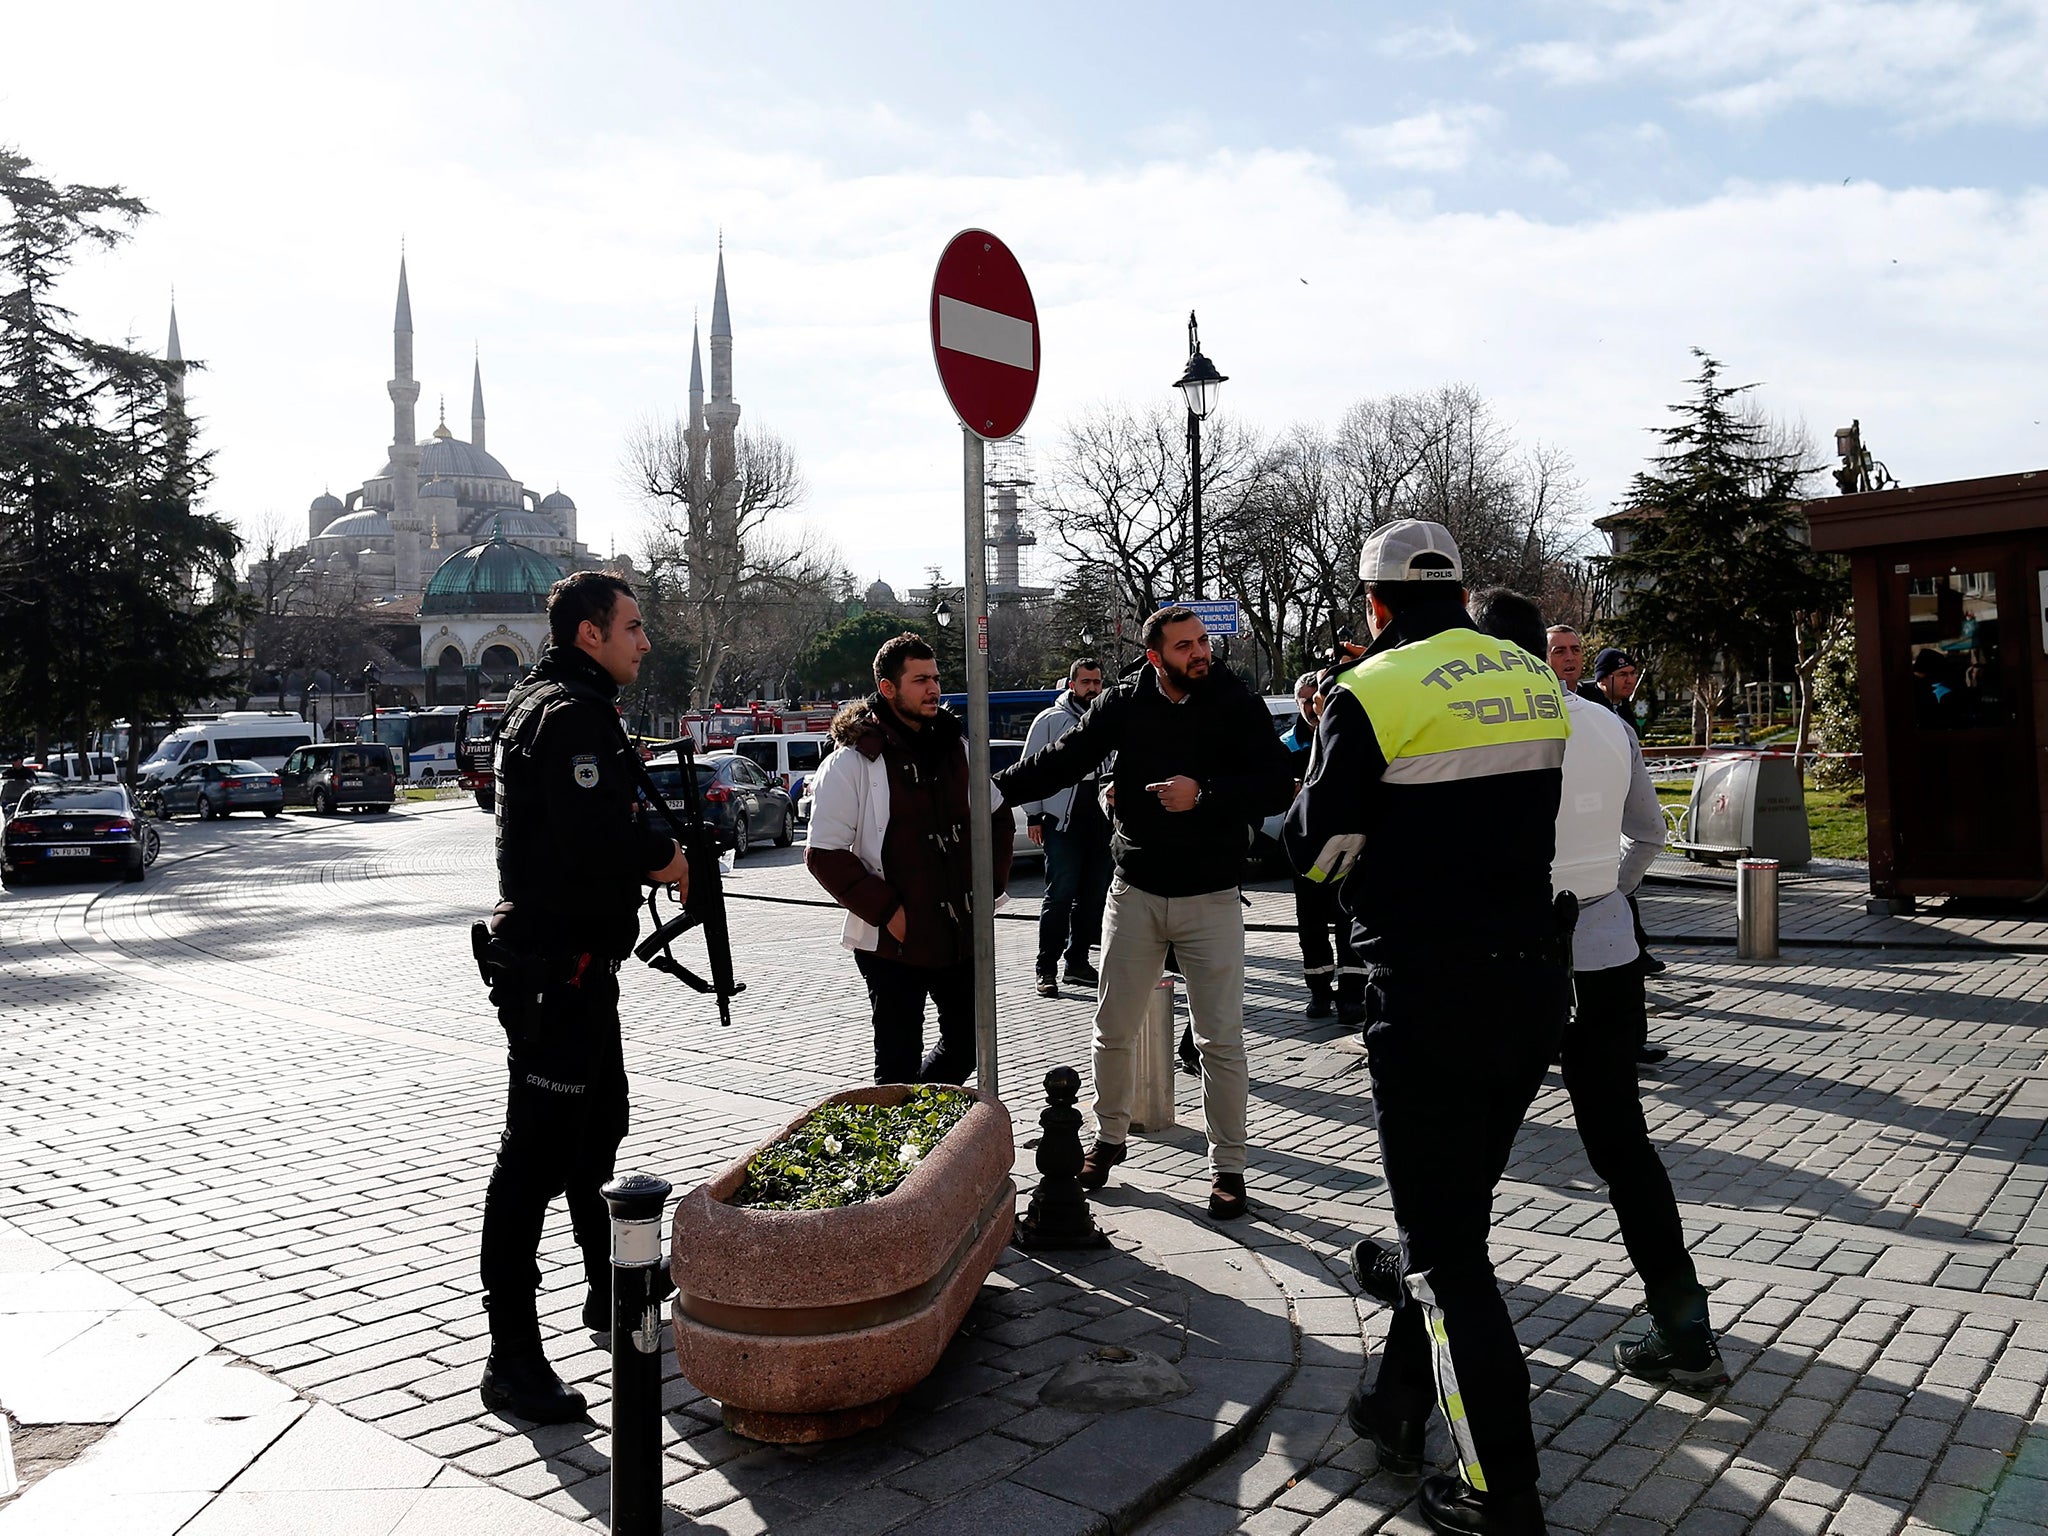 Policemen secure the area after the explosion near the Blue Mosque in the Sultanahmet district of Istanbul